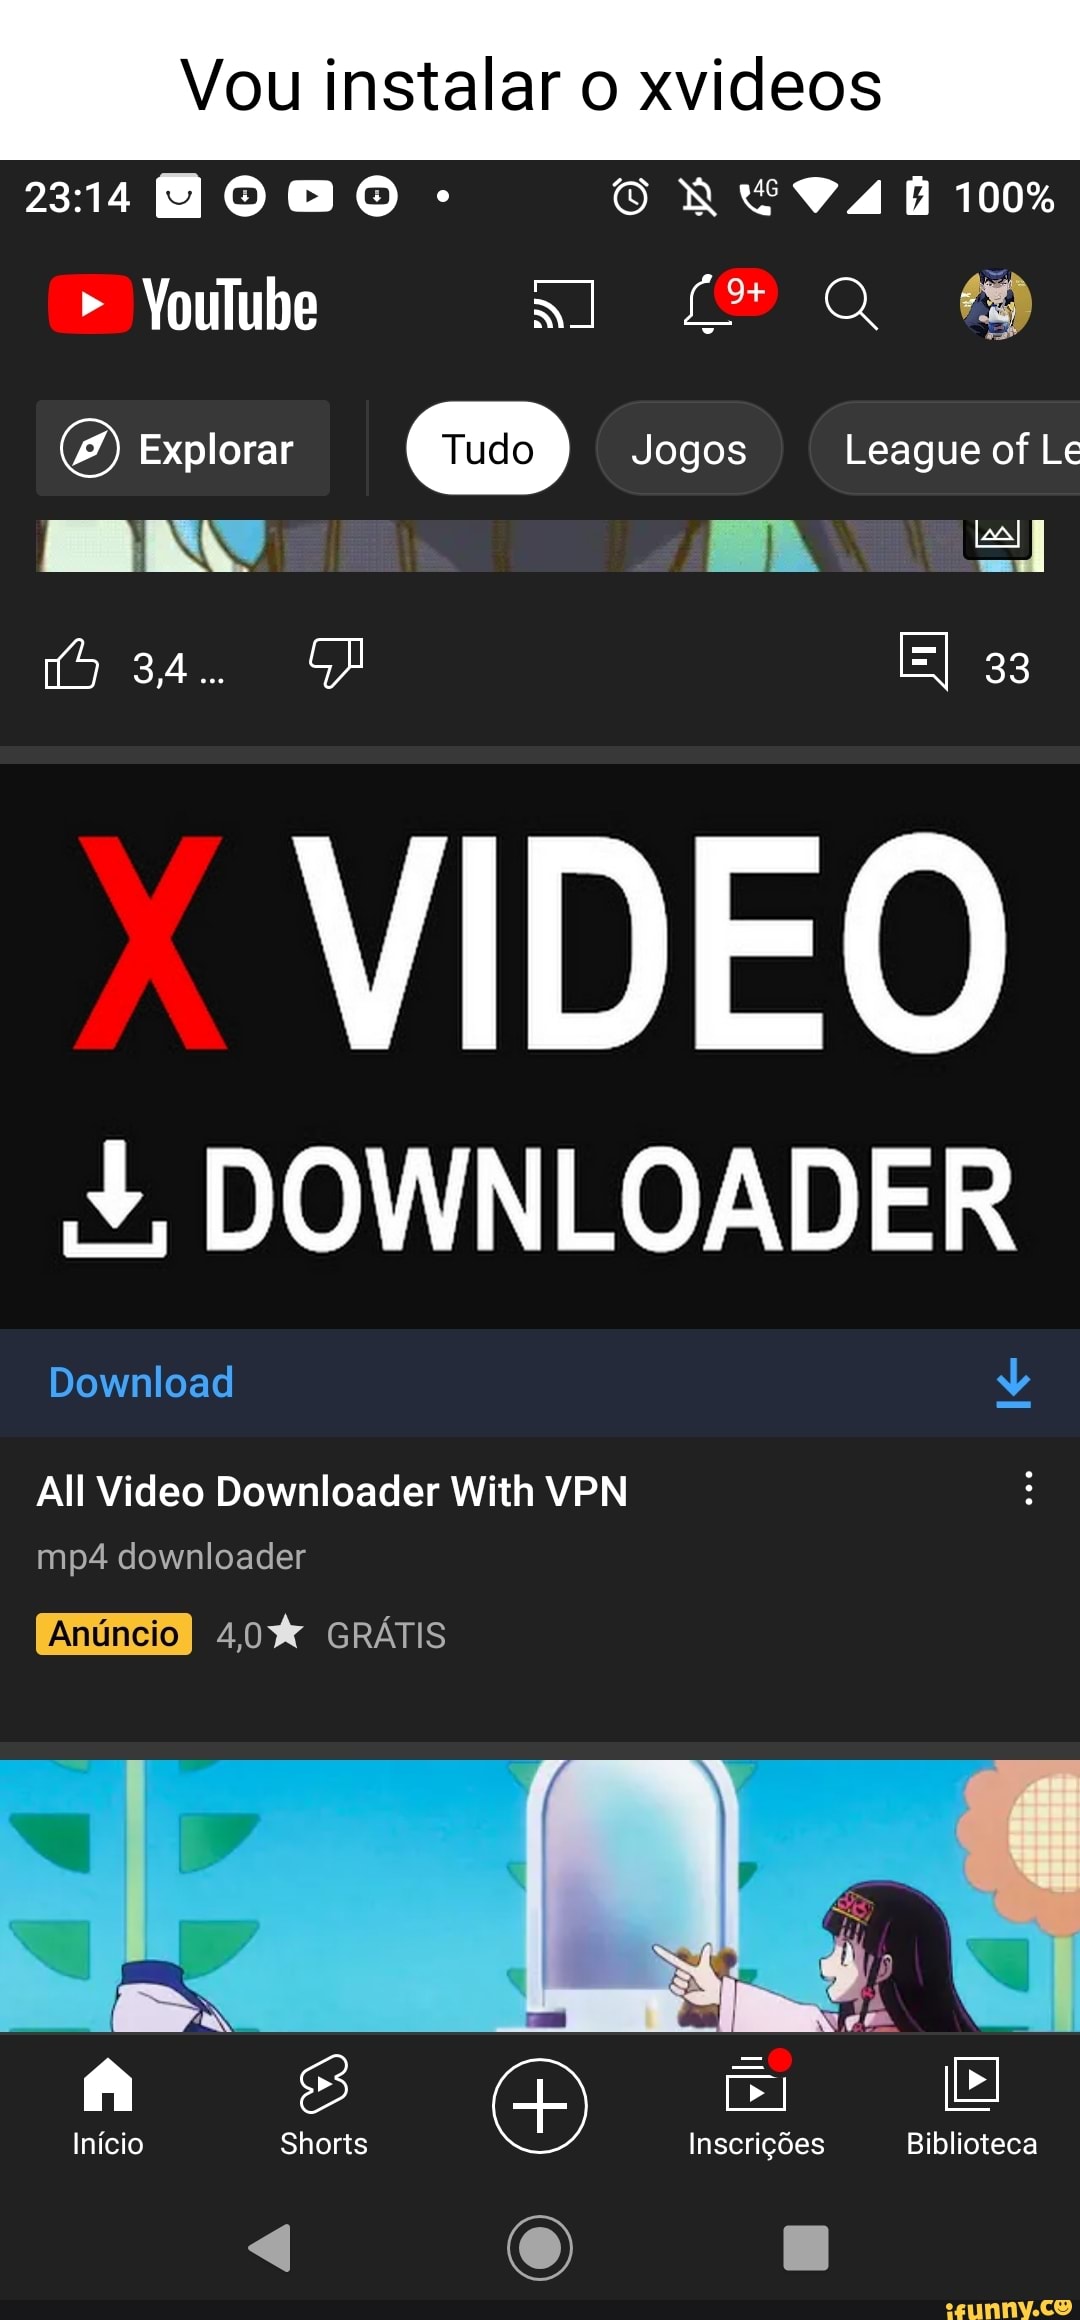 david nary recommends xvideos app for android pic